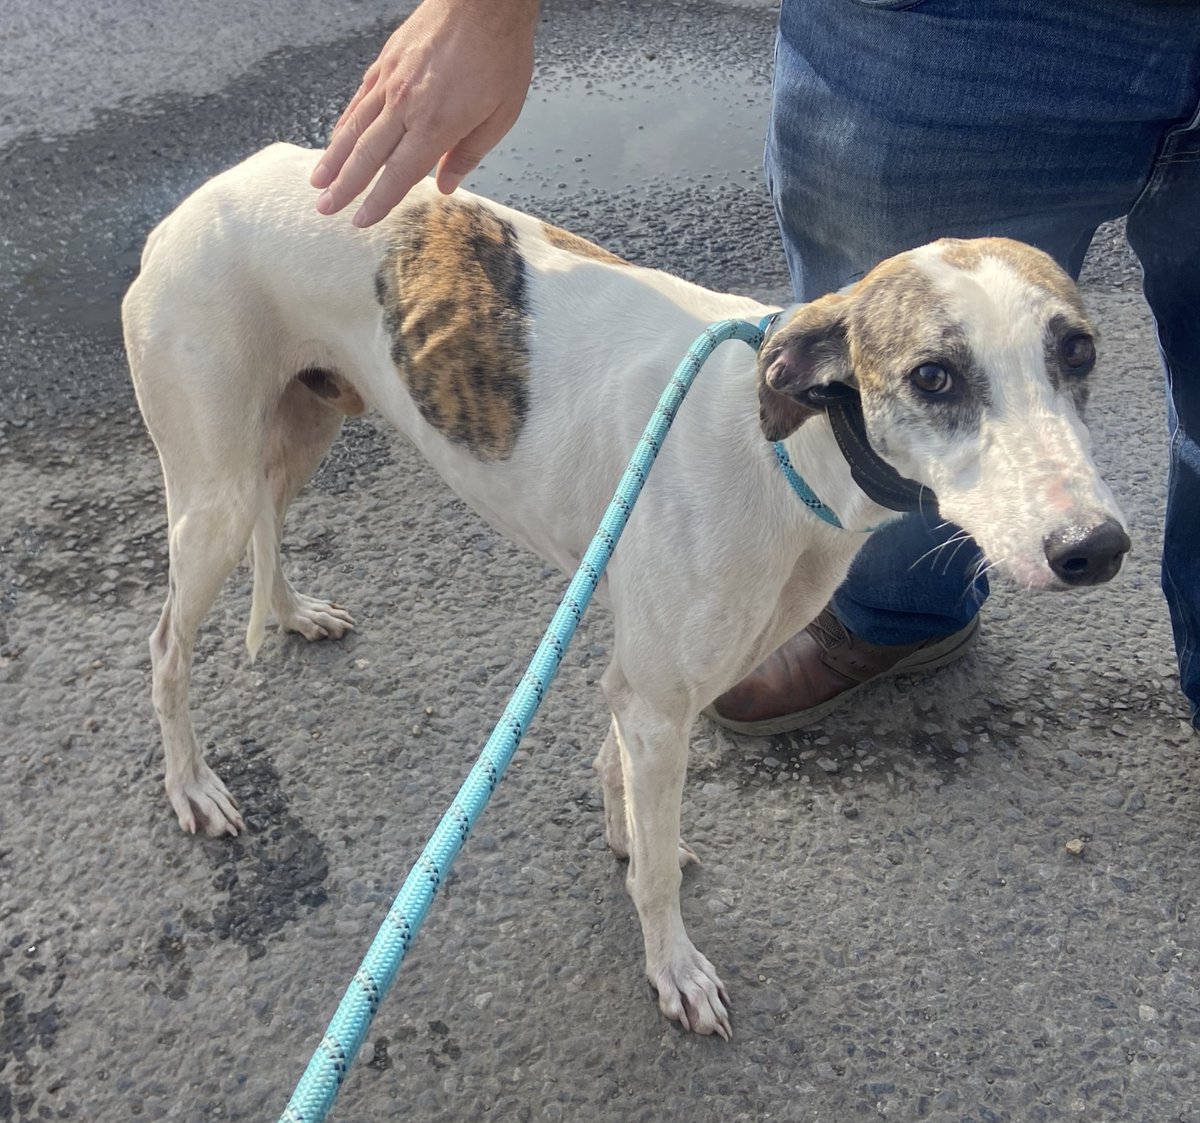 Please retweet to HELP FIND THE OWNER OF THIS STRAY DOG FOUND #IVER #BUCKINGHAMSHIRE #UK Male Greyhound, no chip found 29 Sept. Now in a council pound for 7 days, he could be missing or stolen from another region. Please share widely. DETAILS👇 lostdogsuk.co.uk/lost-dogs/ #dogs…